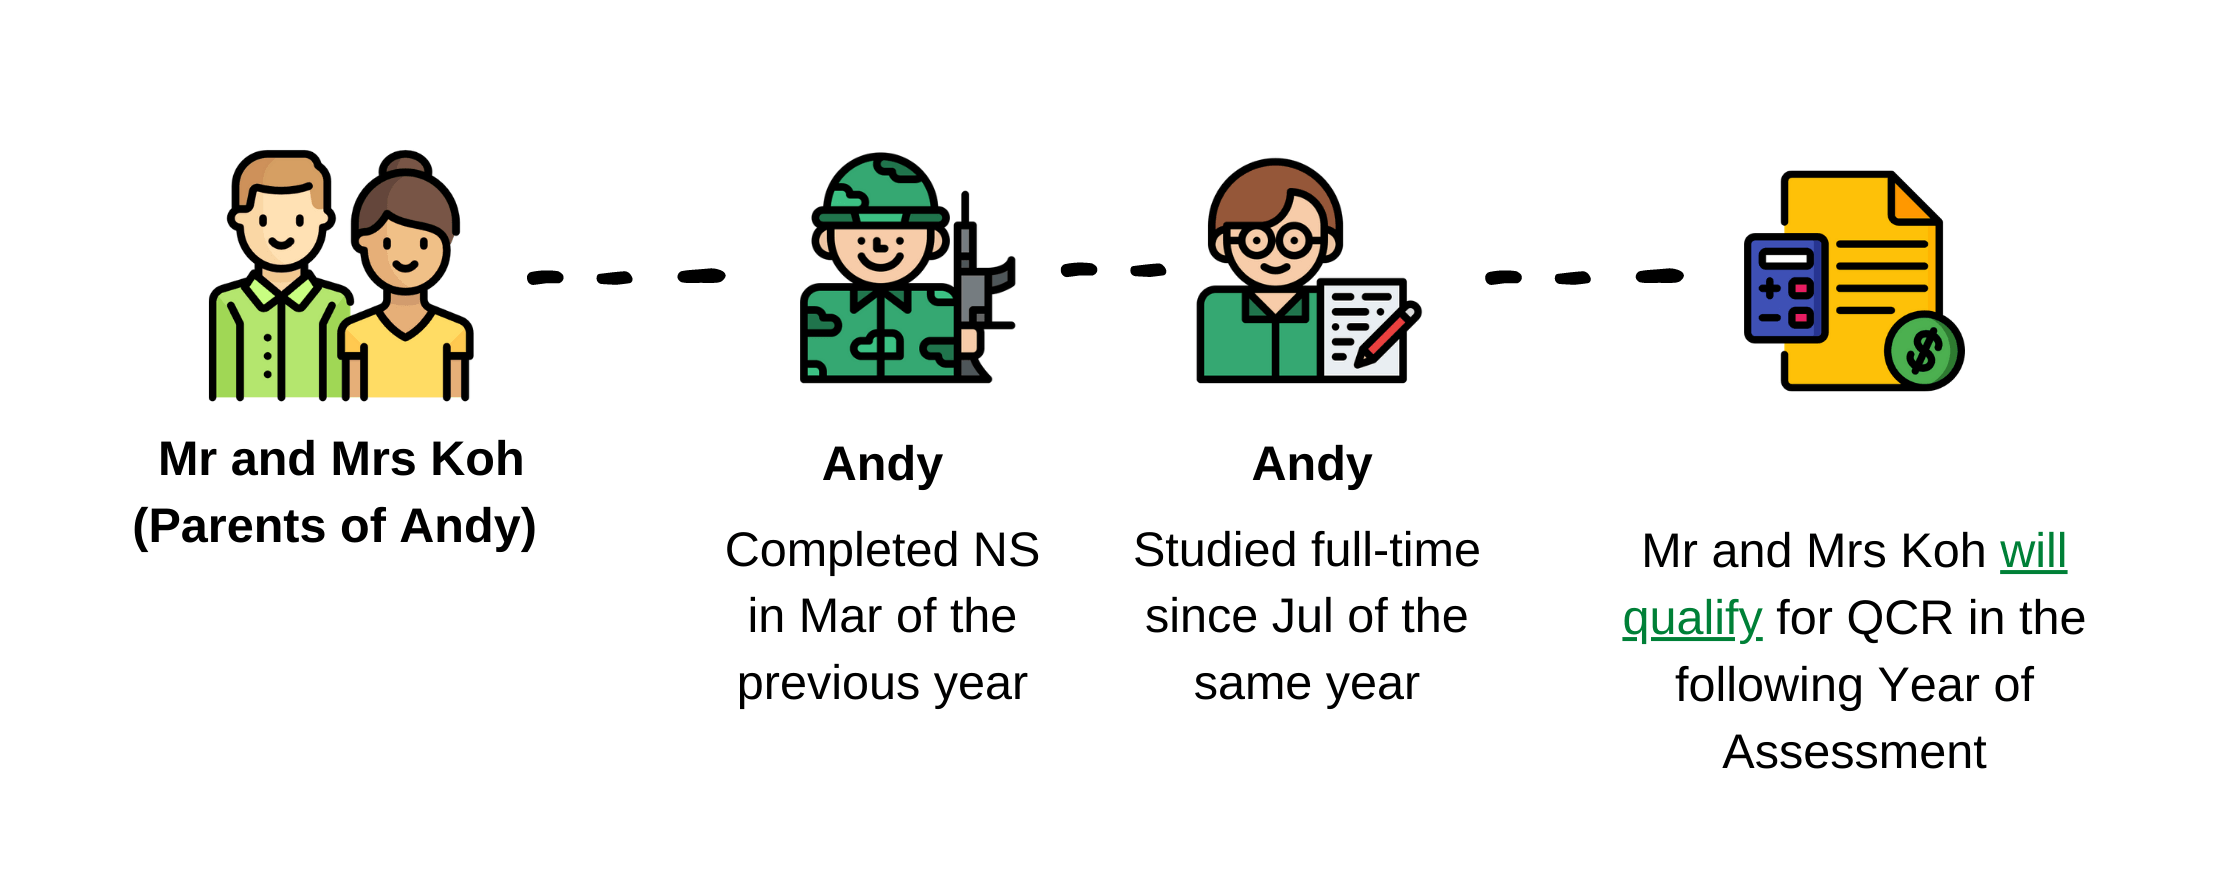 QCR Example on child completing NS and starting full-time studies in the same year